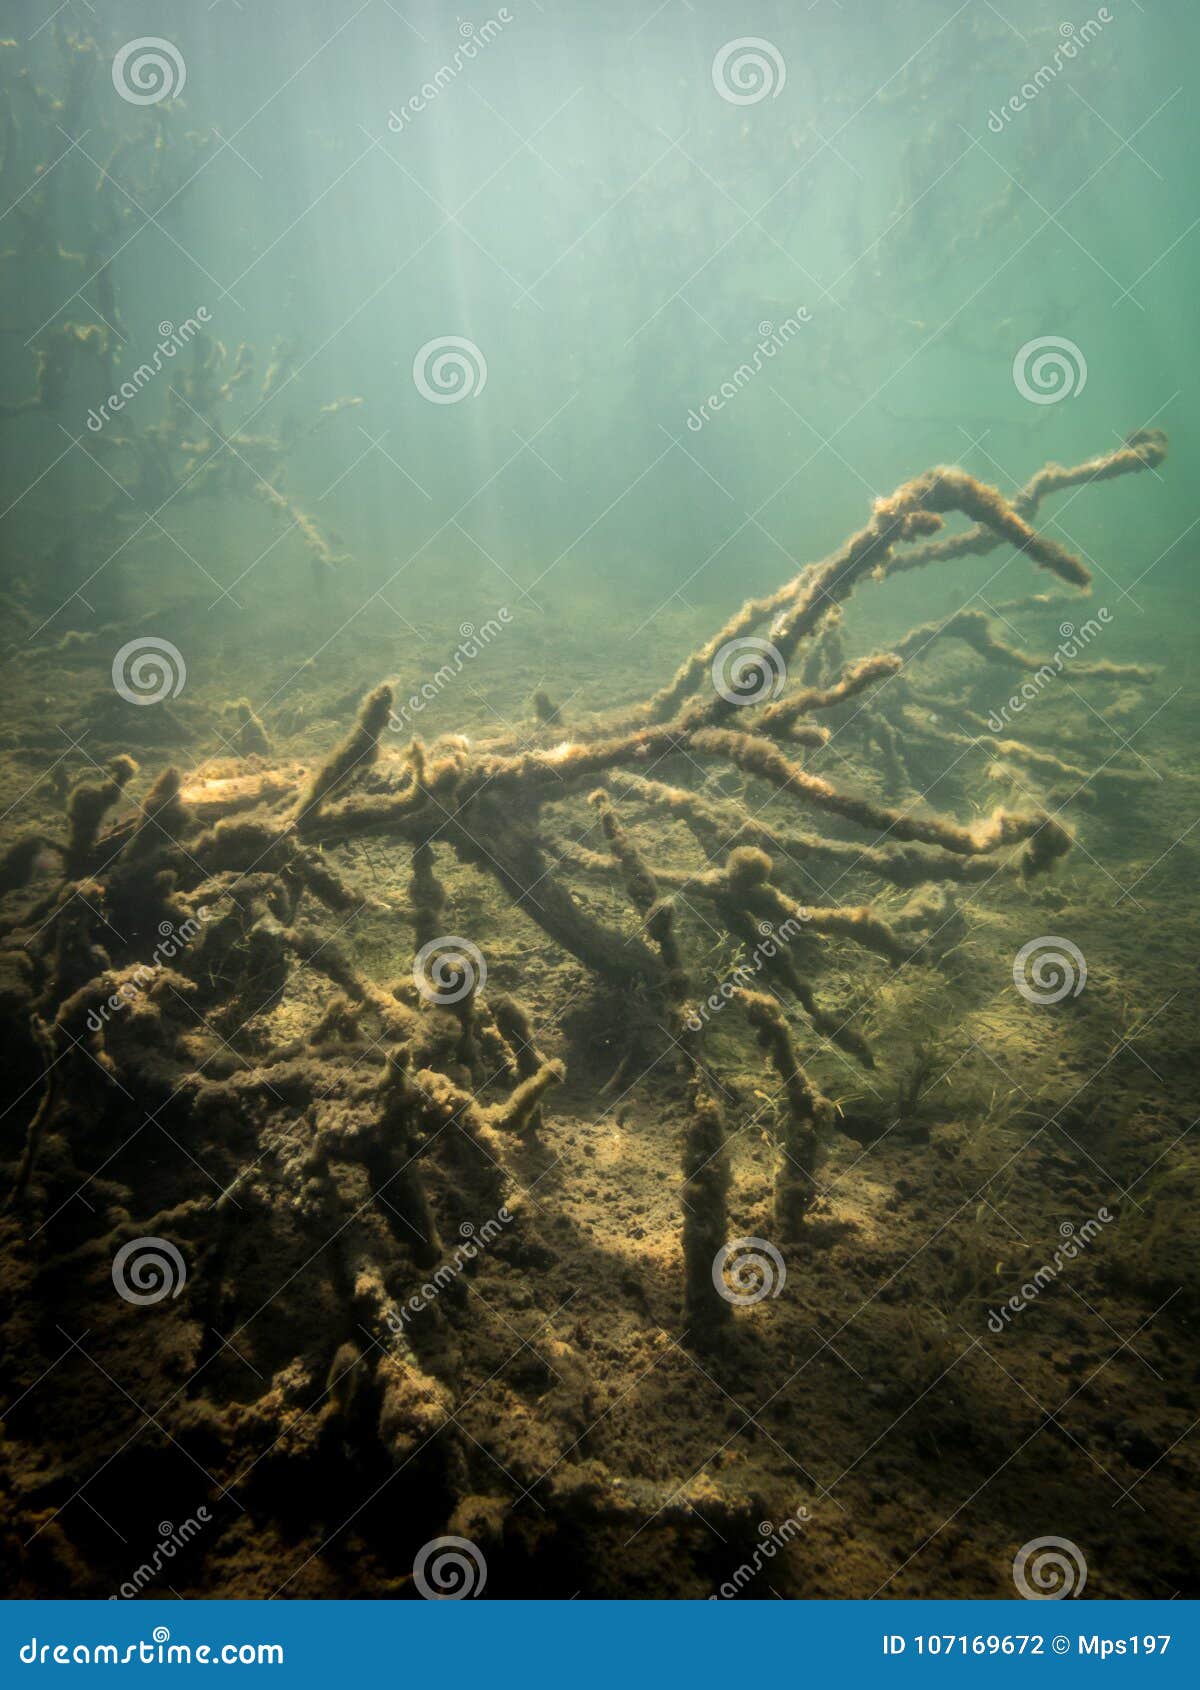 Underwater Branches and Sunbeams Stock Photo - Image of sediment, water